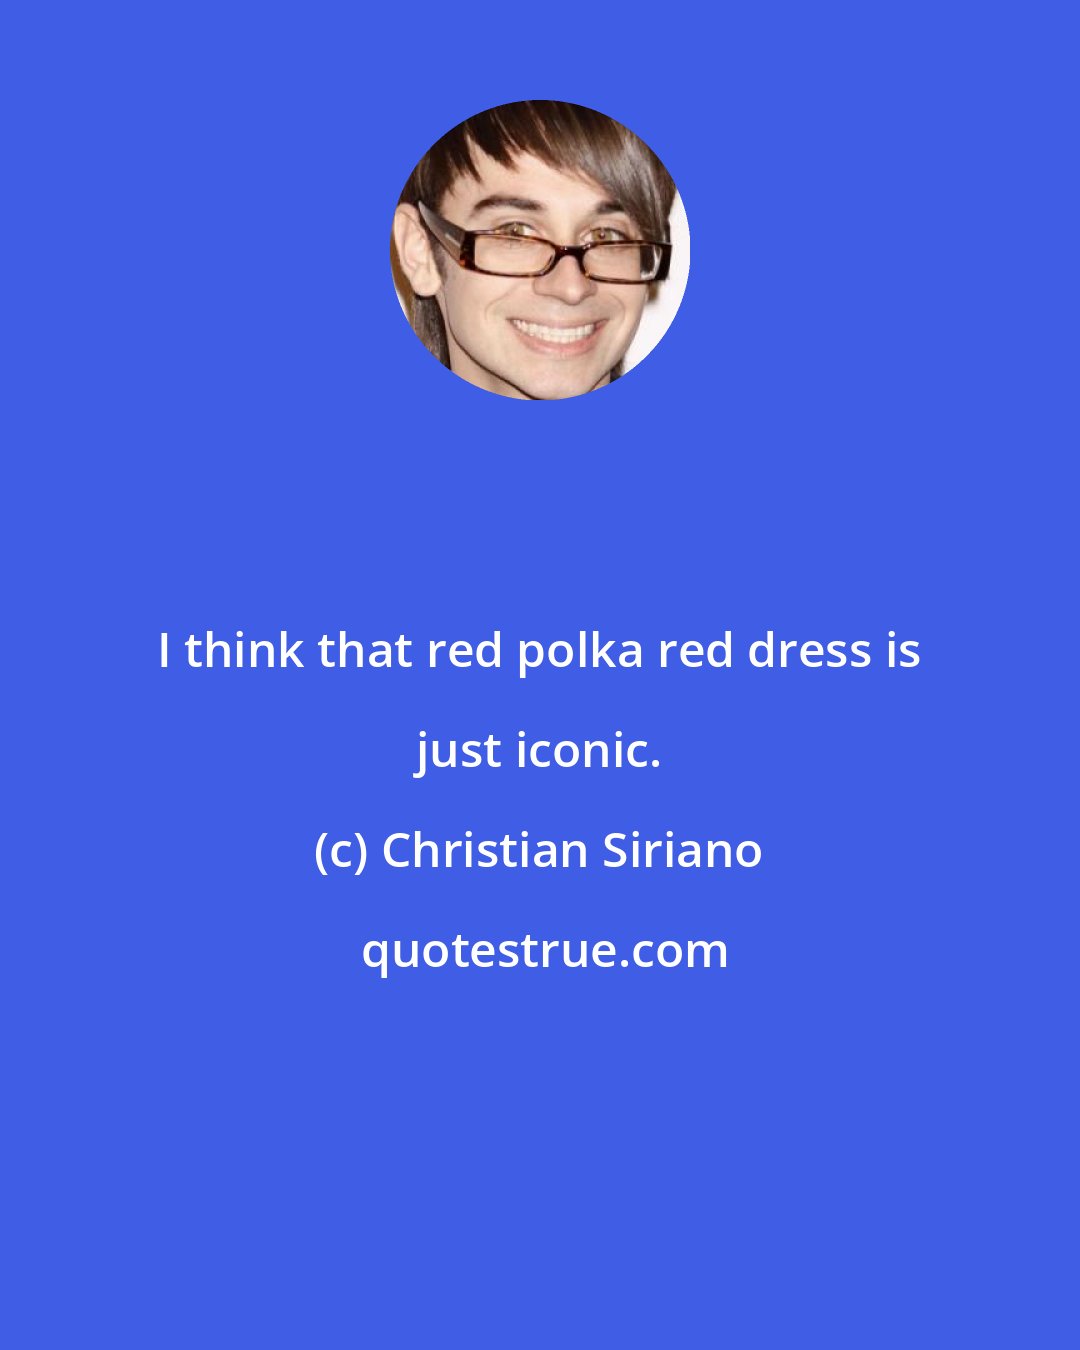 Christian Siriano: I think that red polka red dress is just iconic.